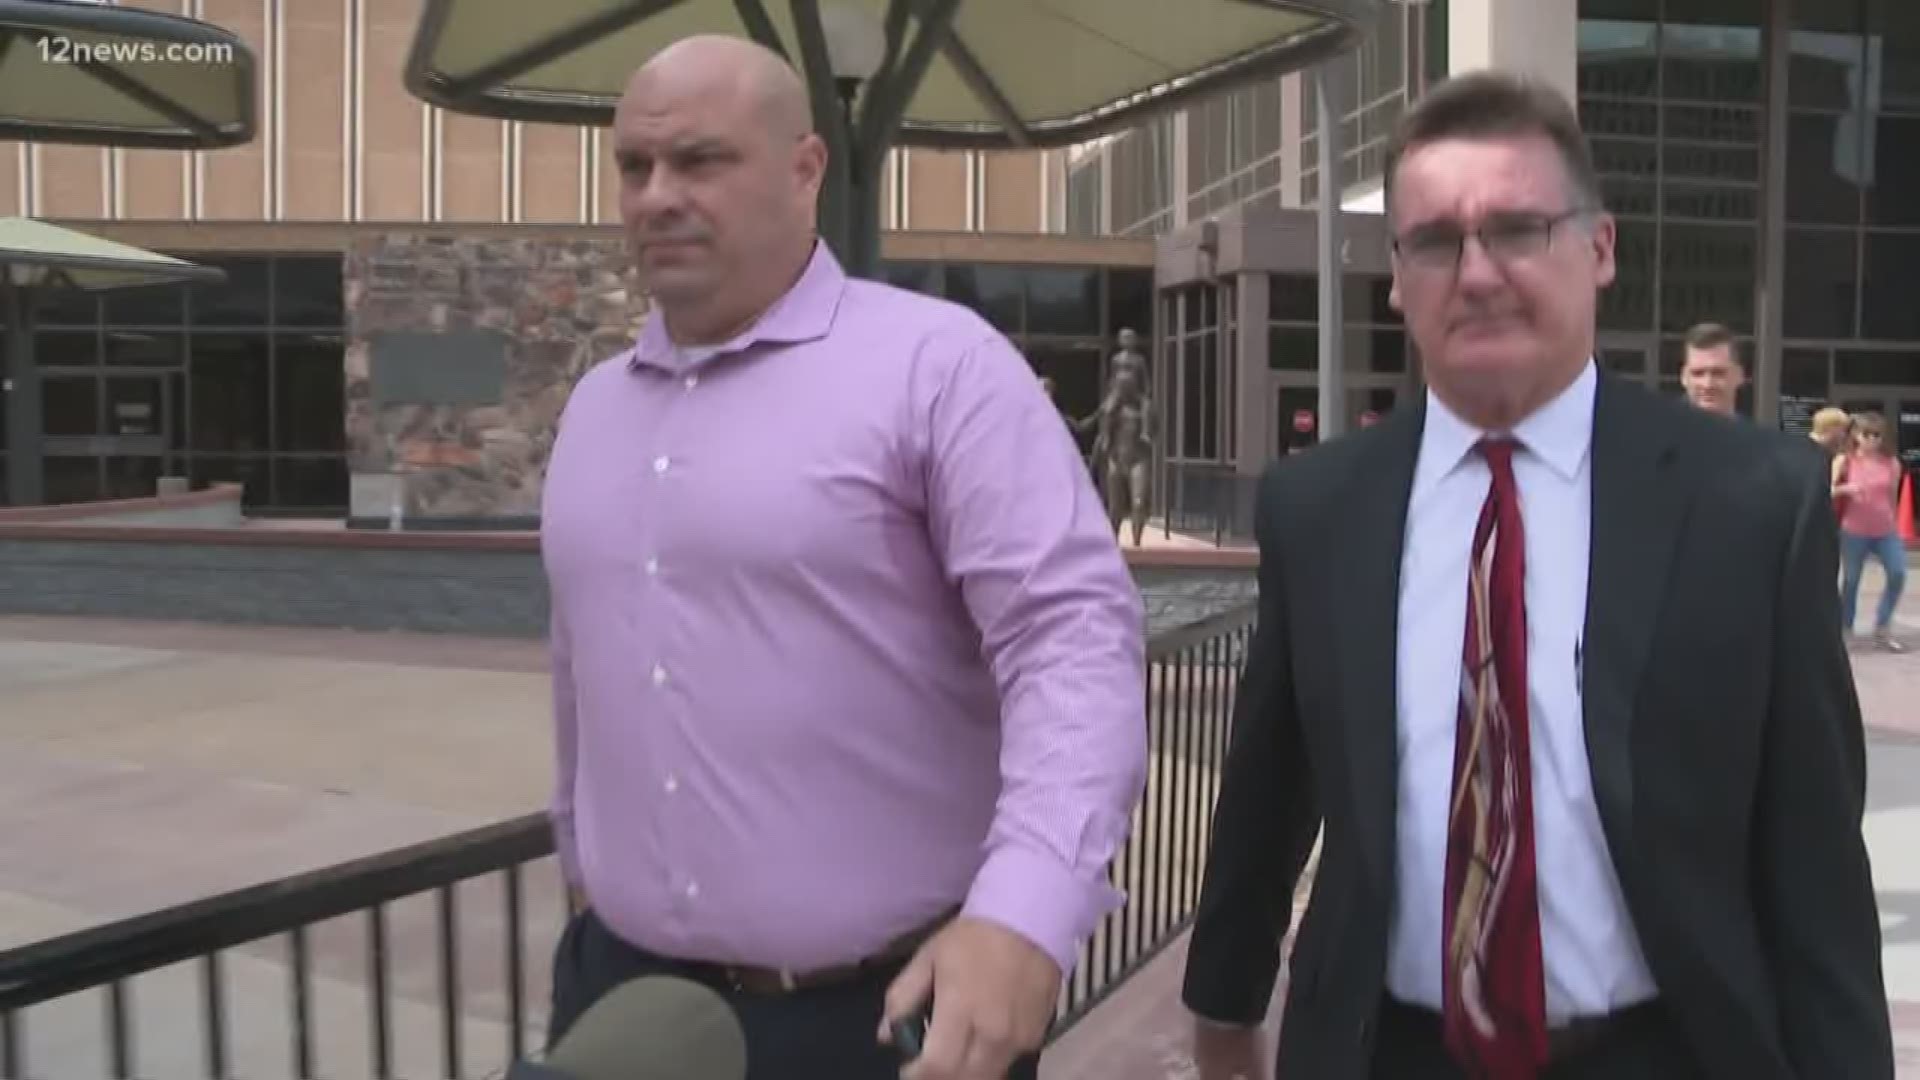 Phoenix police officer Timothy Baiardi is accused of assaulting a handcuffed shoplifting suspect while he was working off-duty as a security guard at a Valley Walmart. Baiardi entered a plea of "not guilty" in court Thursday.